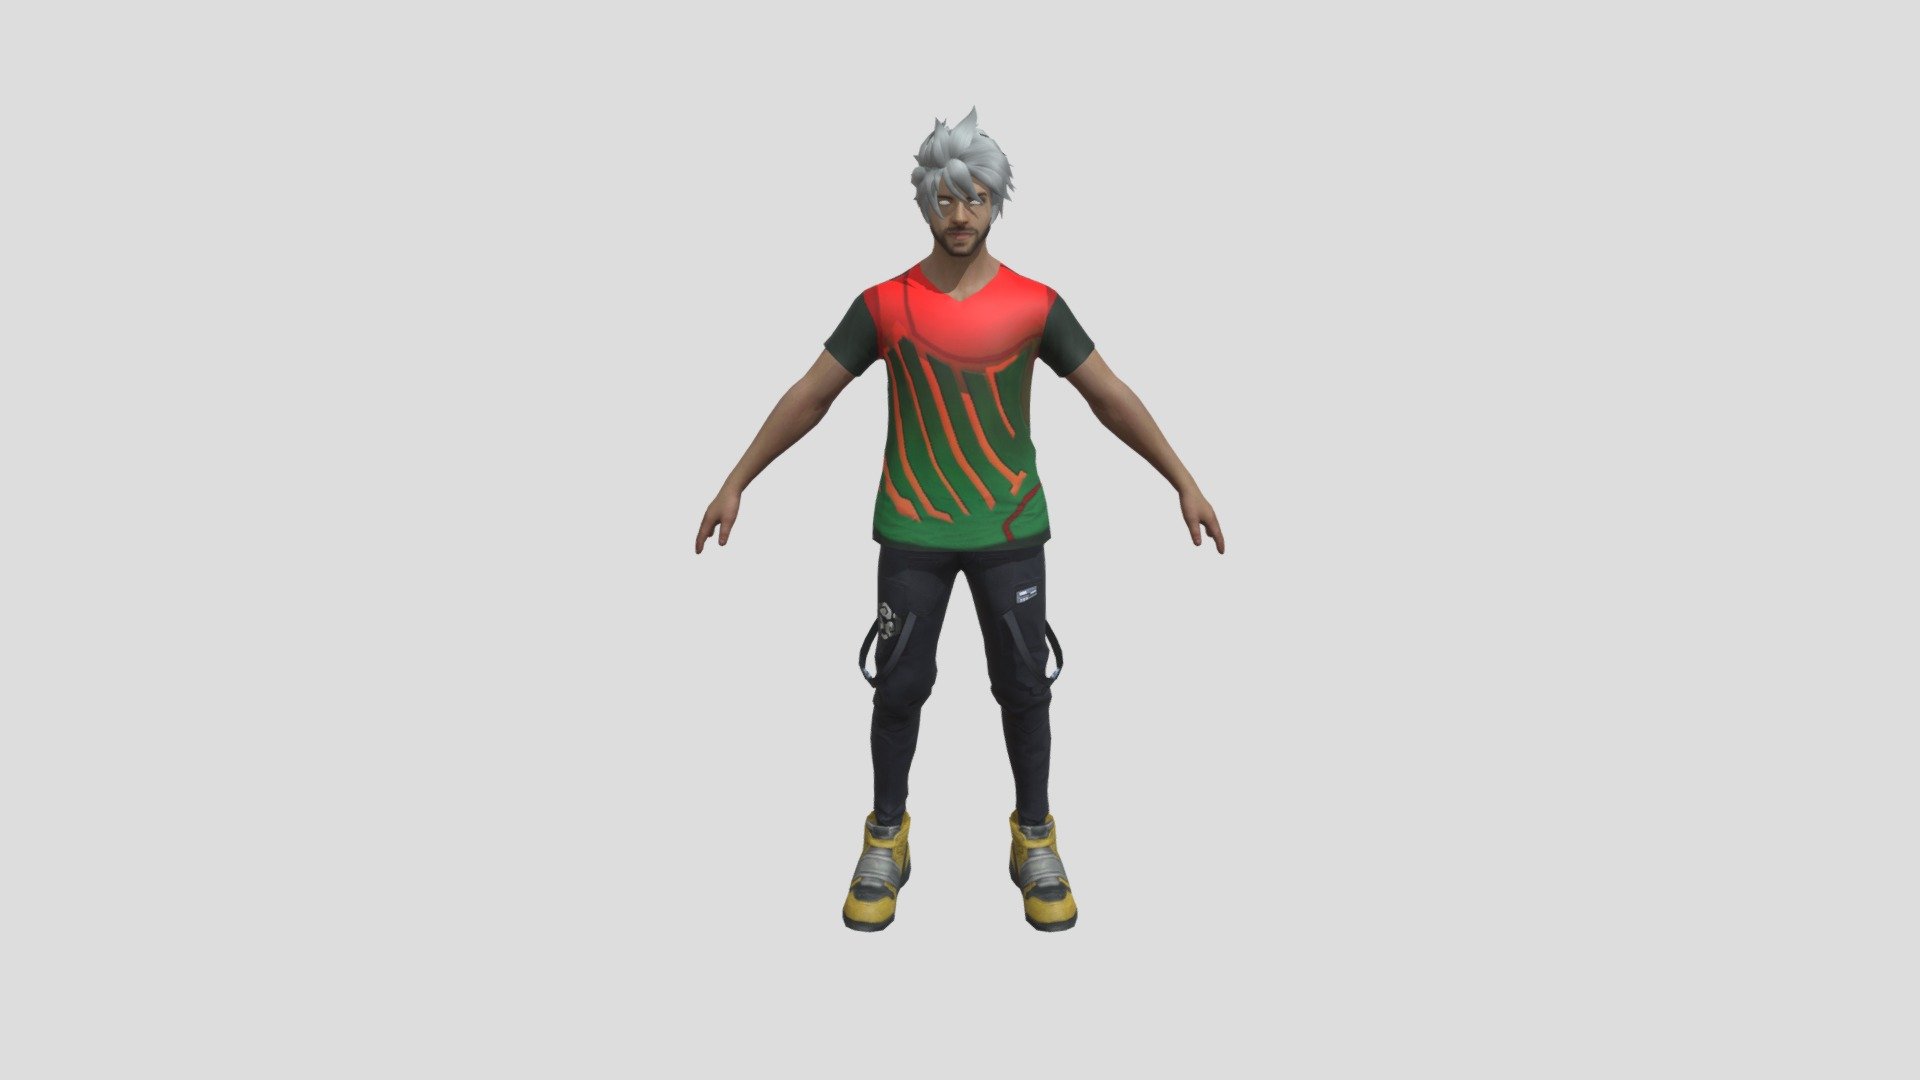 Free Fire Indian Jersey 3D Model here:

https://youtu.be/tg1M6Kuklaw

Free Fire Bangladesh 3d jersey model | Bangladeshi jersey 3d Model free download.

Hello Free Fire Editor,
Welcome to &ldquo;Free Fire 3D Model